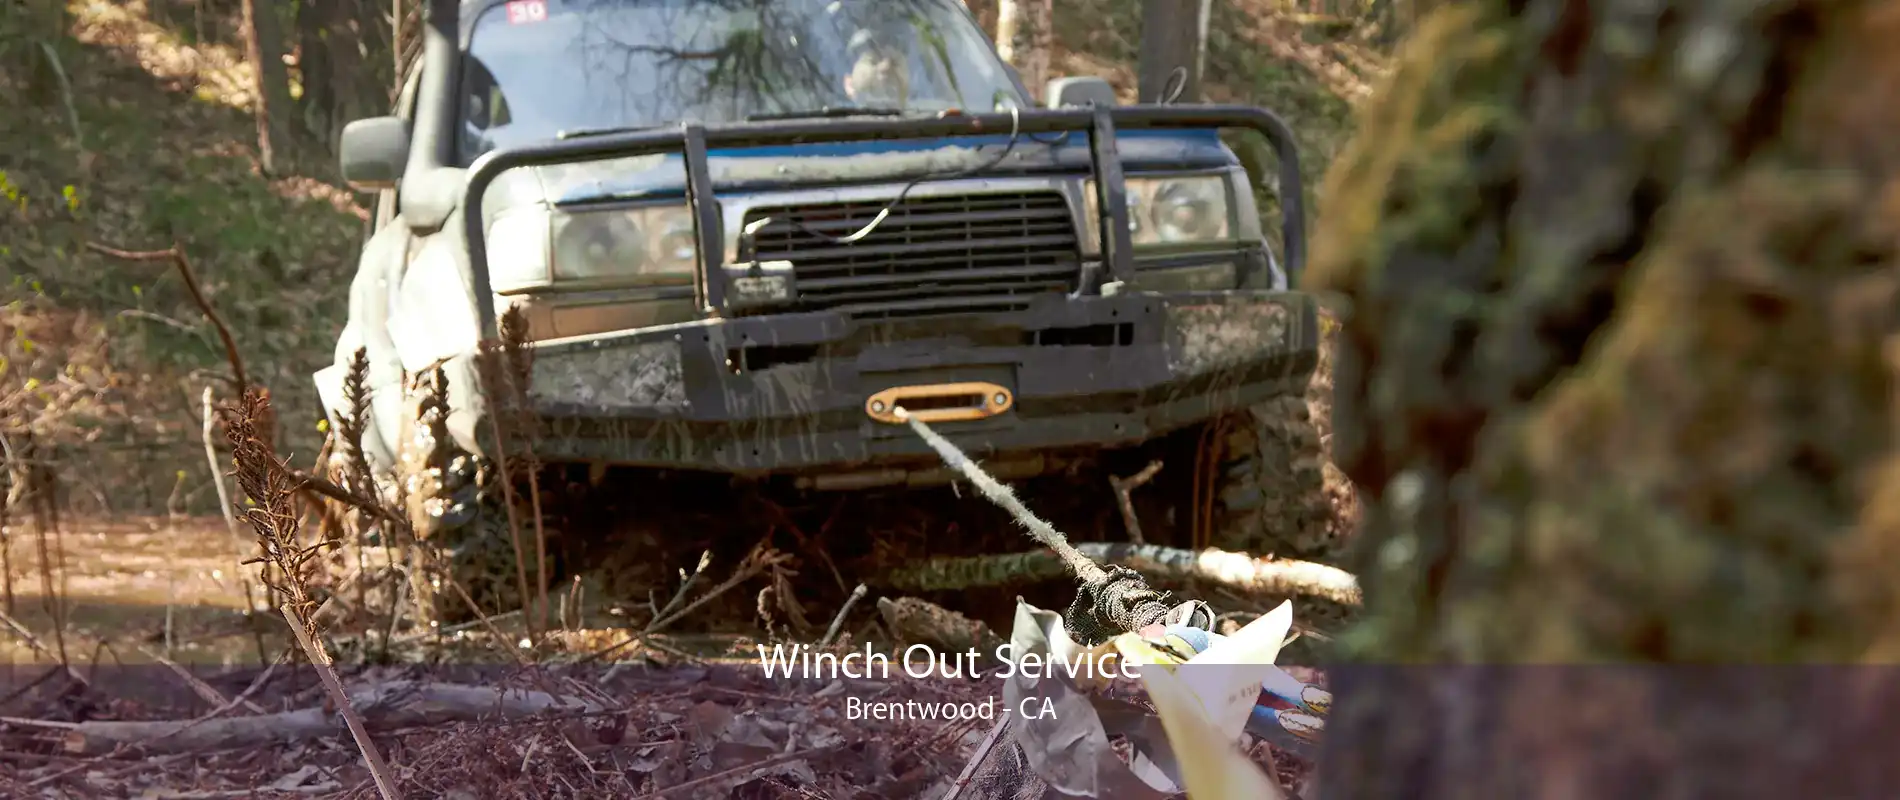 Winch Out Service Brentwood - CA